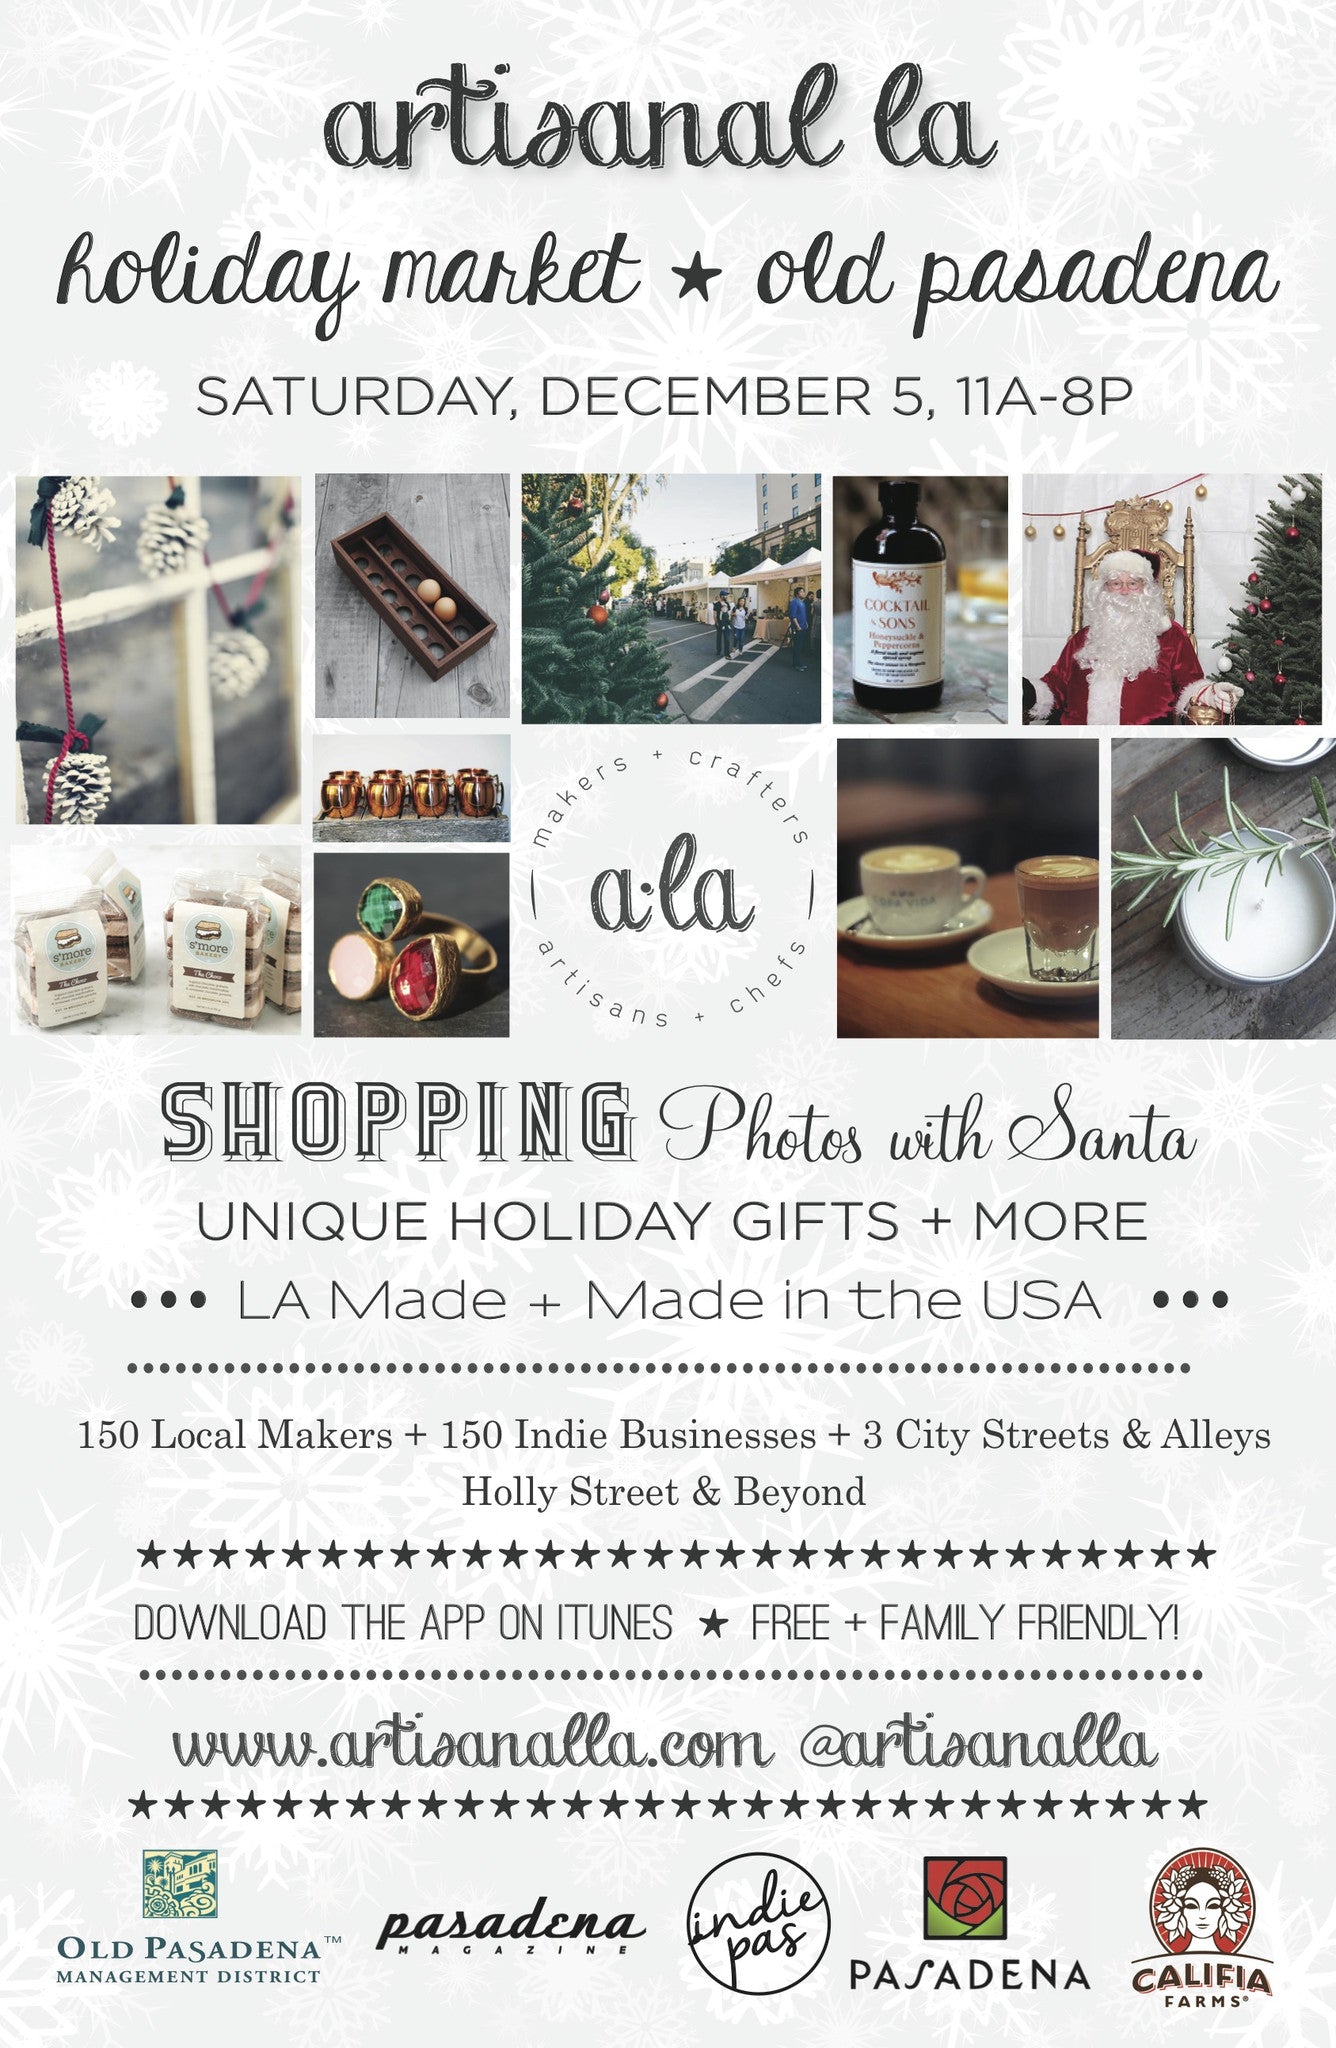 We will be @ Artisanal LA's Holiday Market on December 5th!!!!